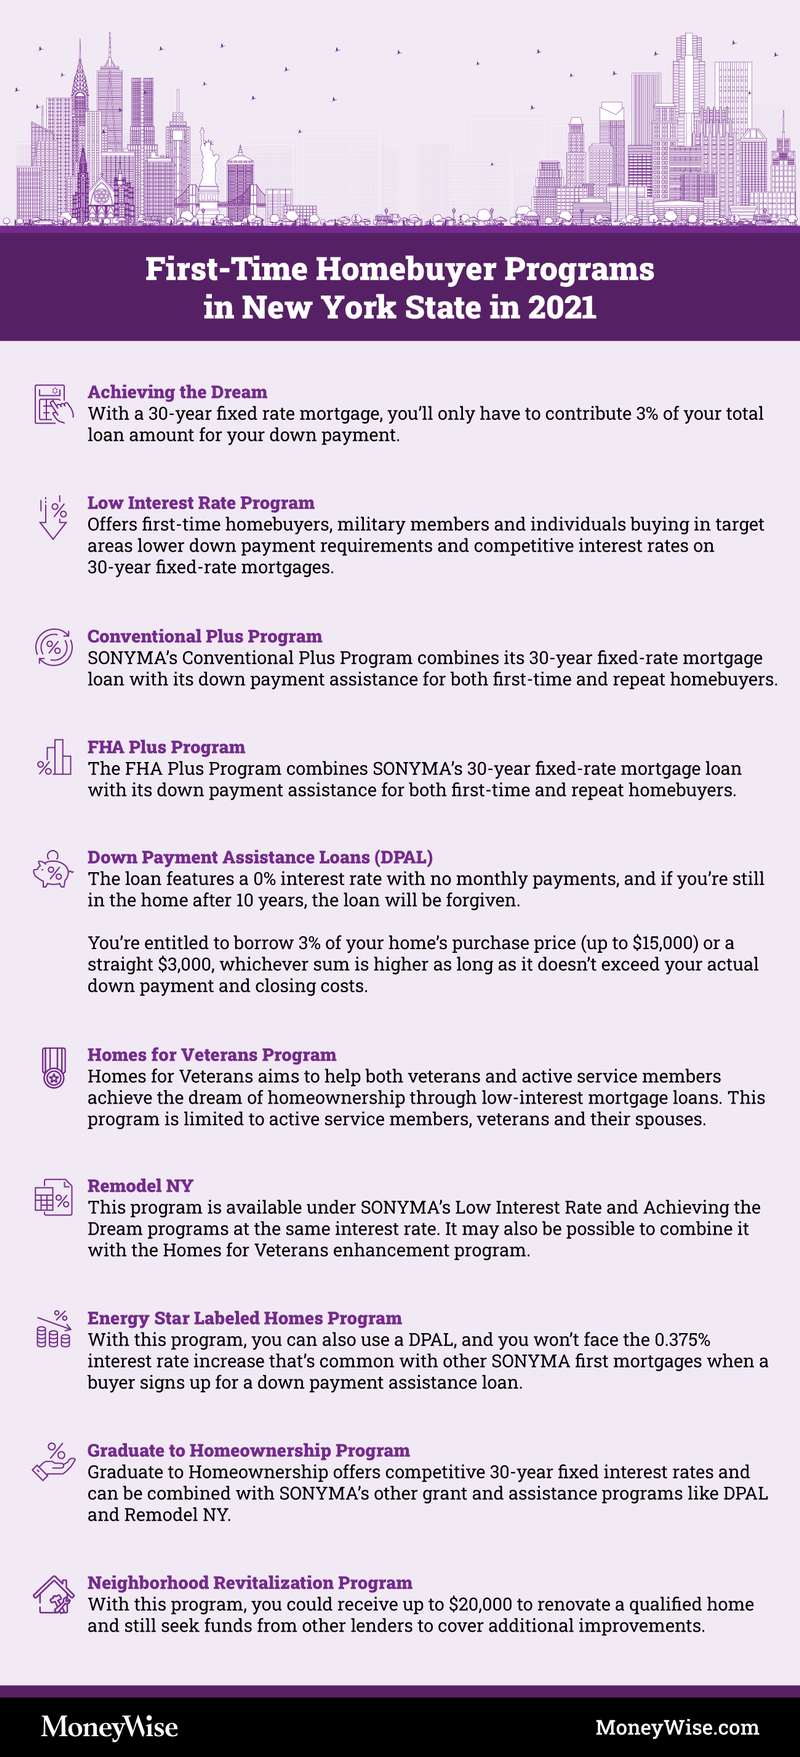 Infographic explaining programs for first-time home-buyers in NY